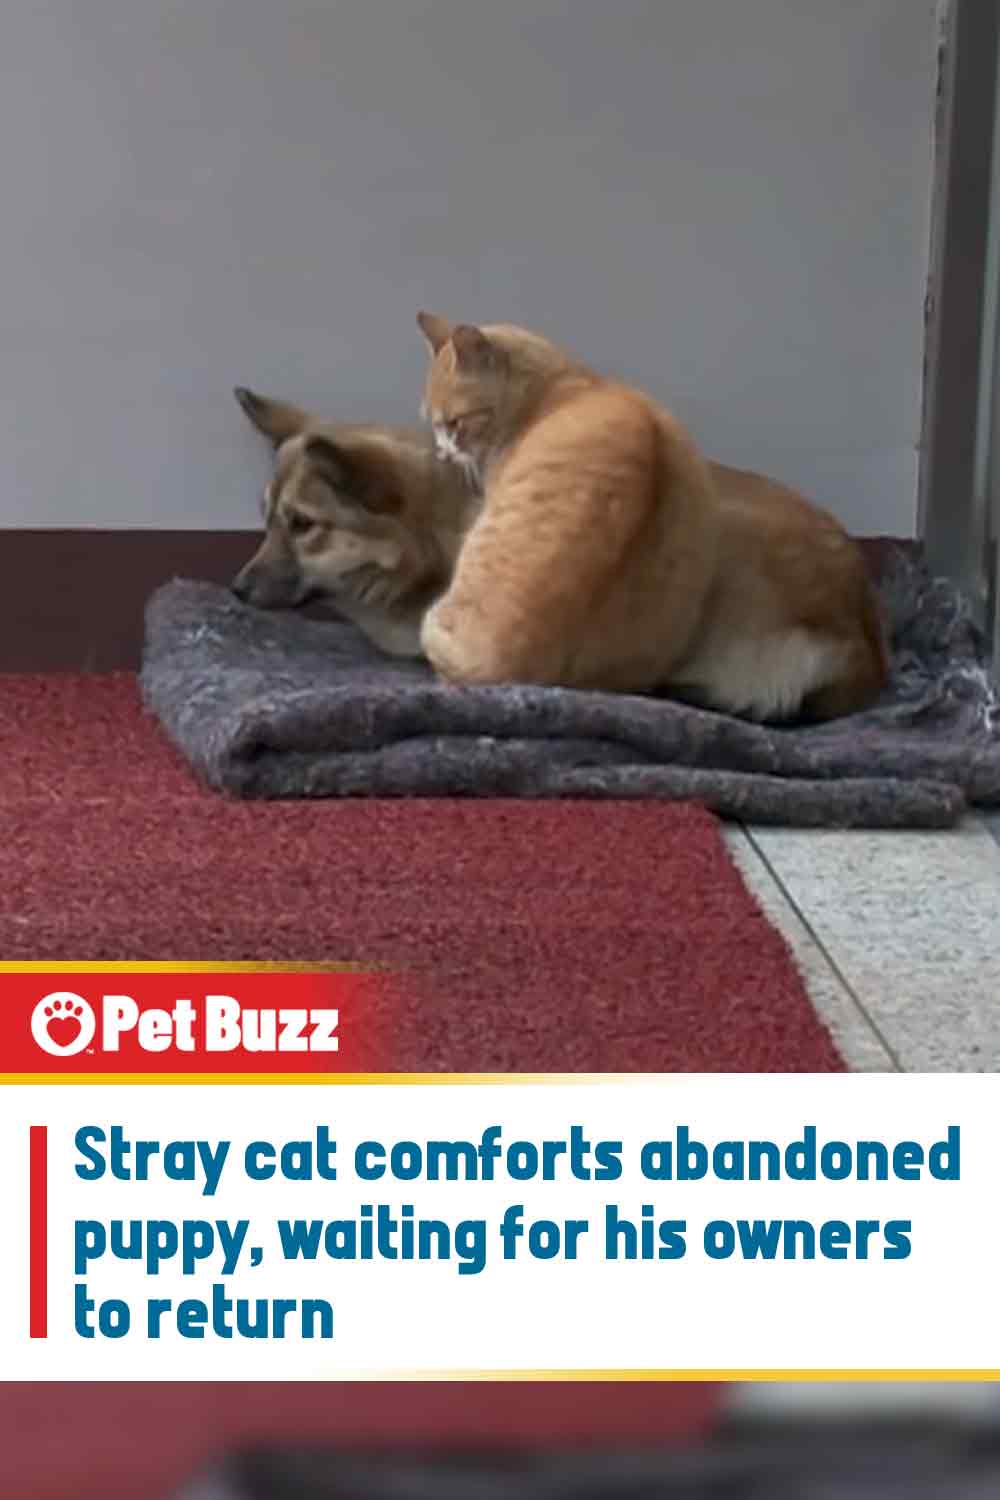 Stray cat comforts abandoned puppy, waiting for his owners to return